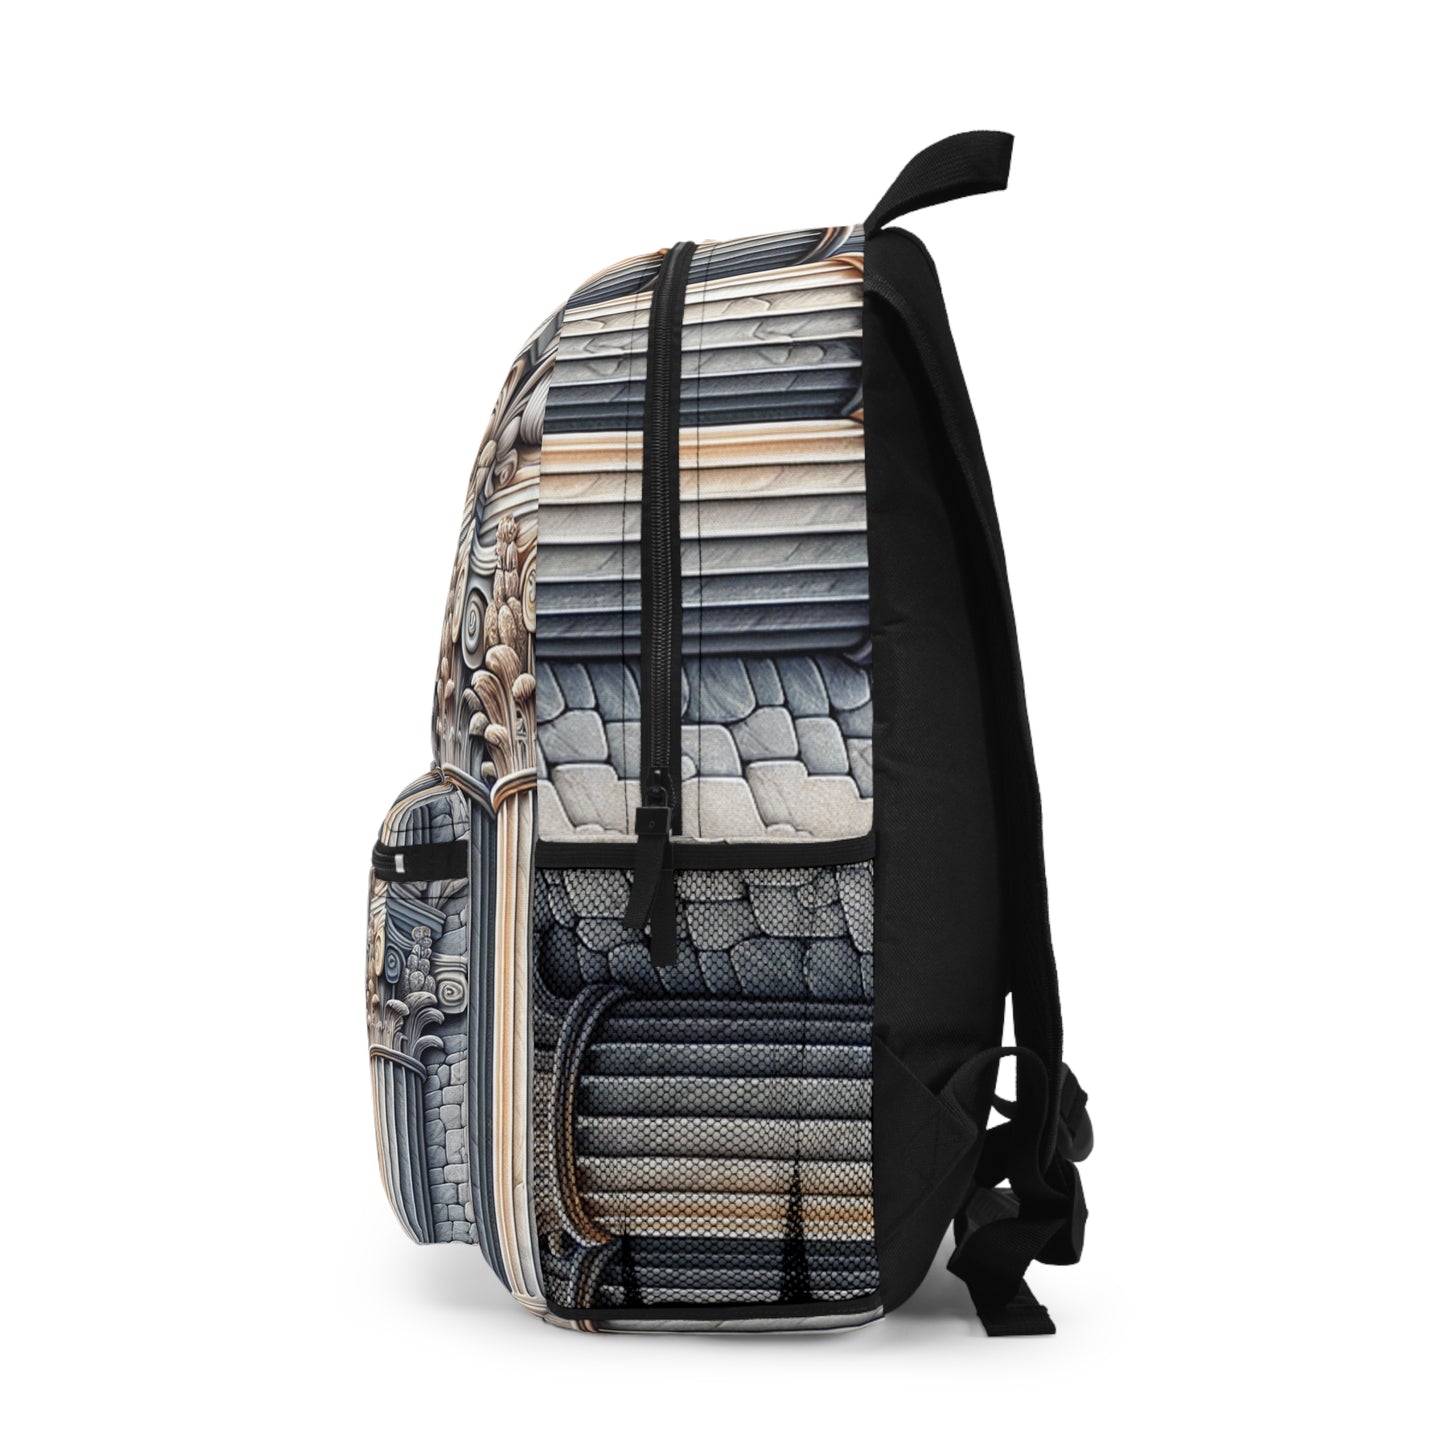 "3D Wall Columns: An Architectural Artpiece" - The Alien Backpack Trompe-l'oeil Style